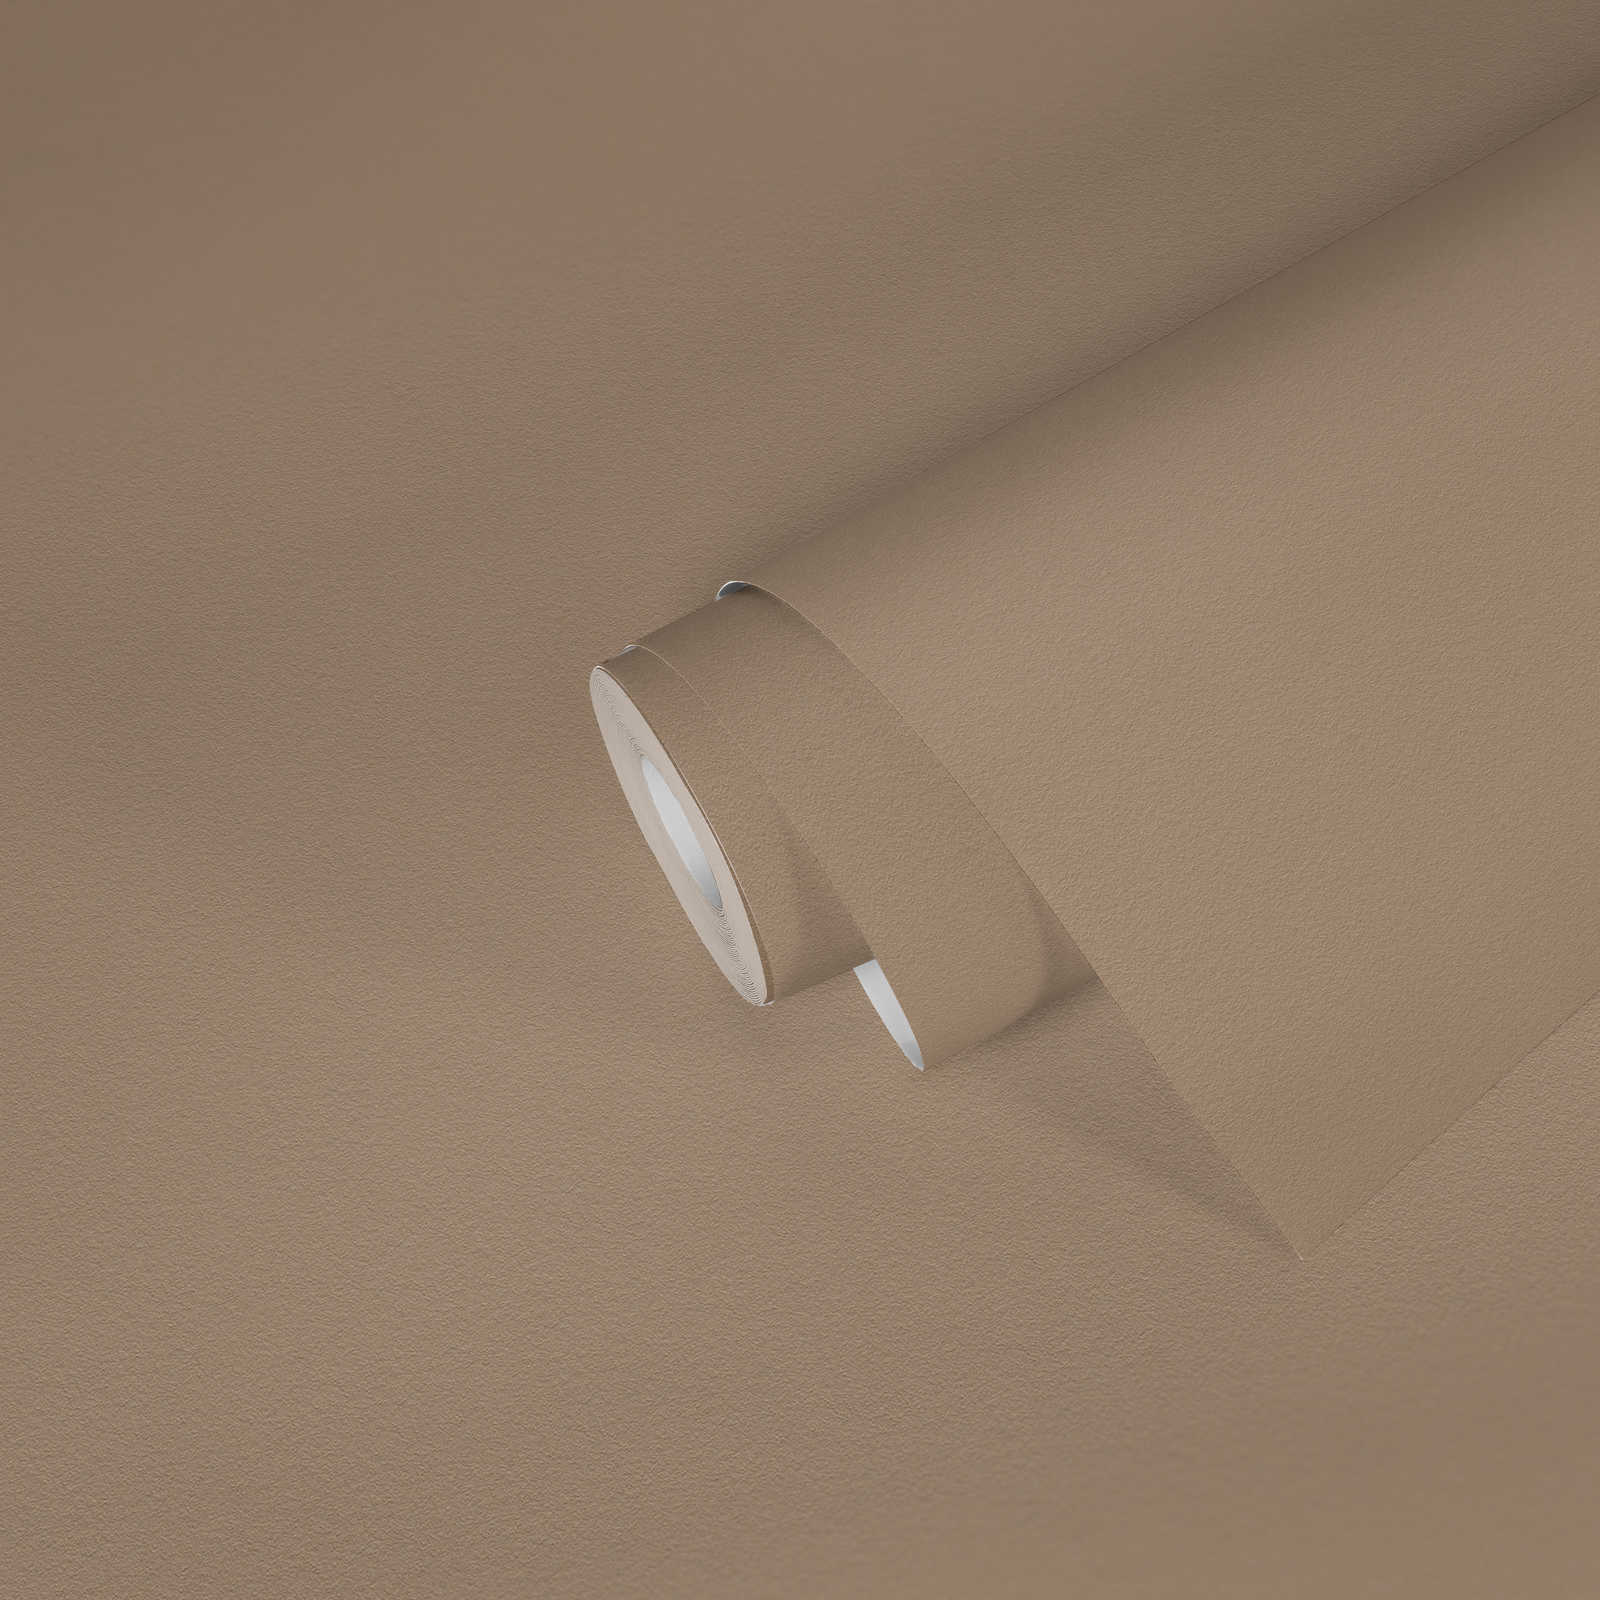             Plain wallpaper light brown with smooth surface - beige, brown
        